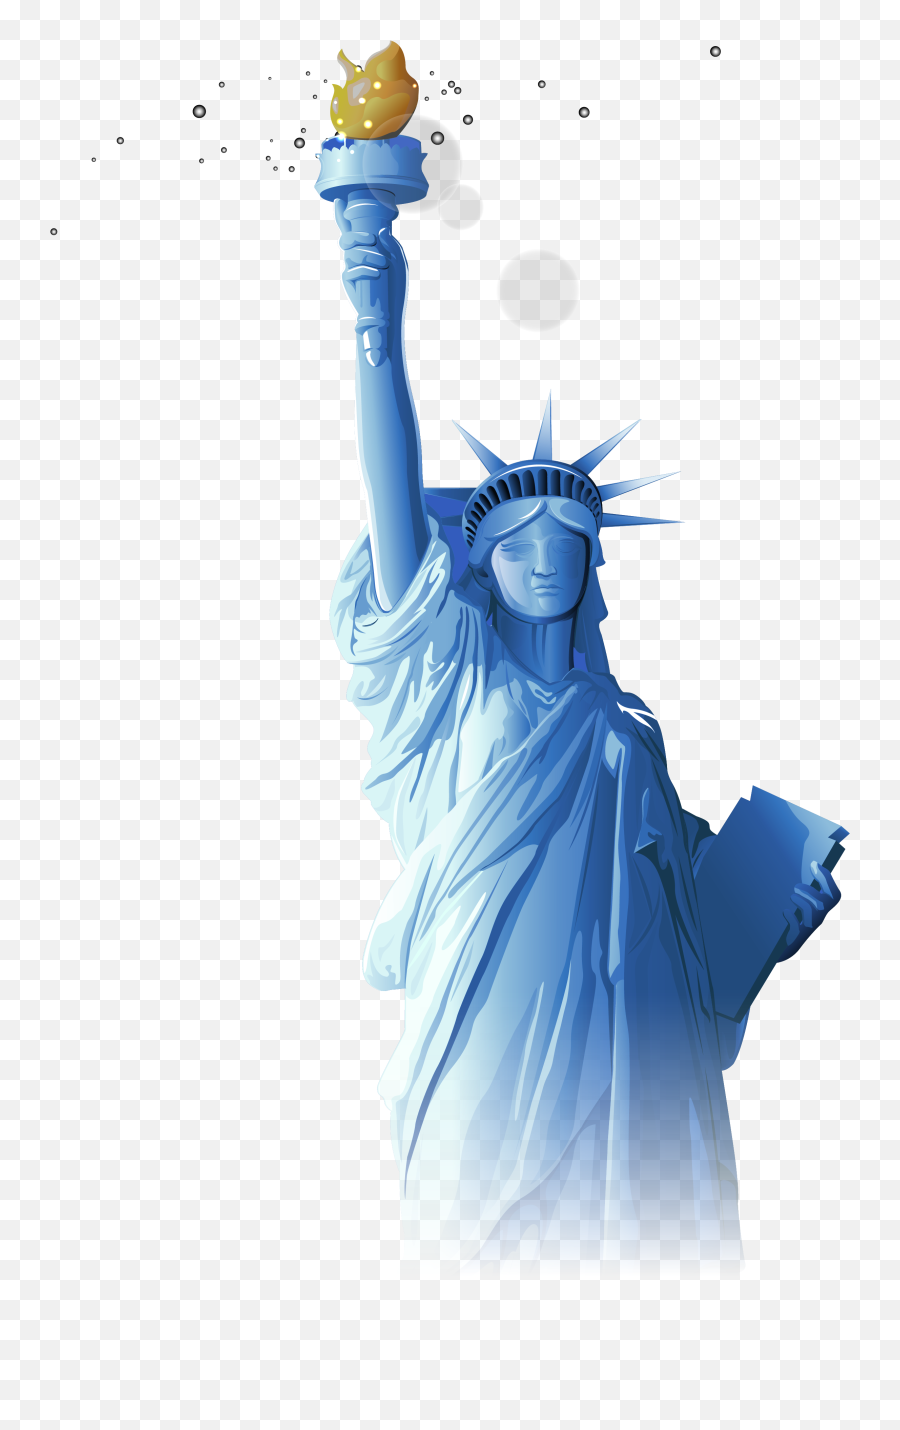 Free - Statue Of Liberty Infographic Transparent Cartoon Statue Of Liberty Transparent Emoji,4th Of July Clipart Free